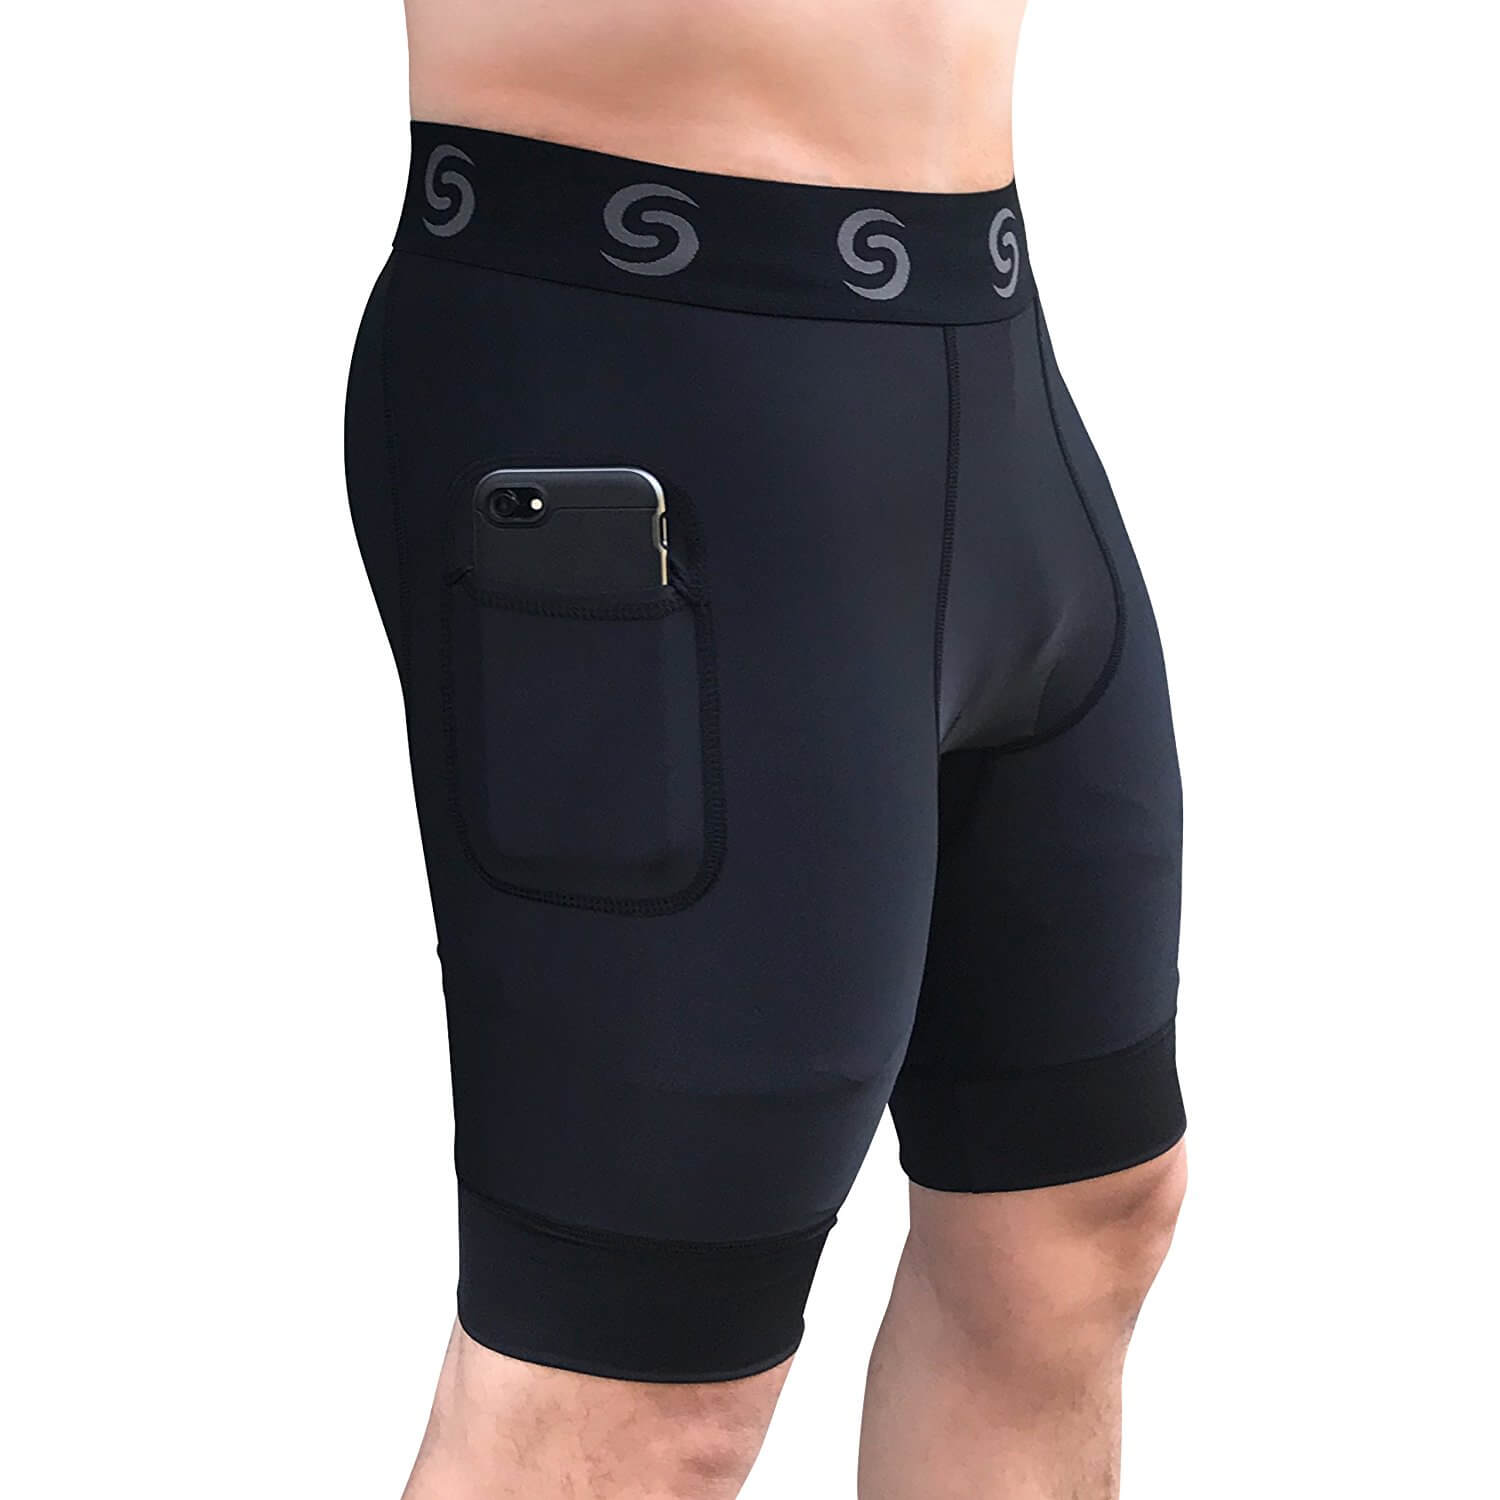 Compression Shorts For Men With Pockets